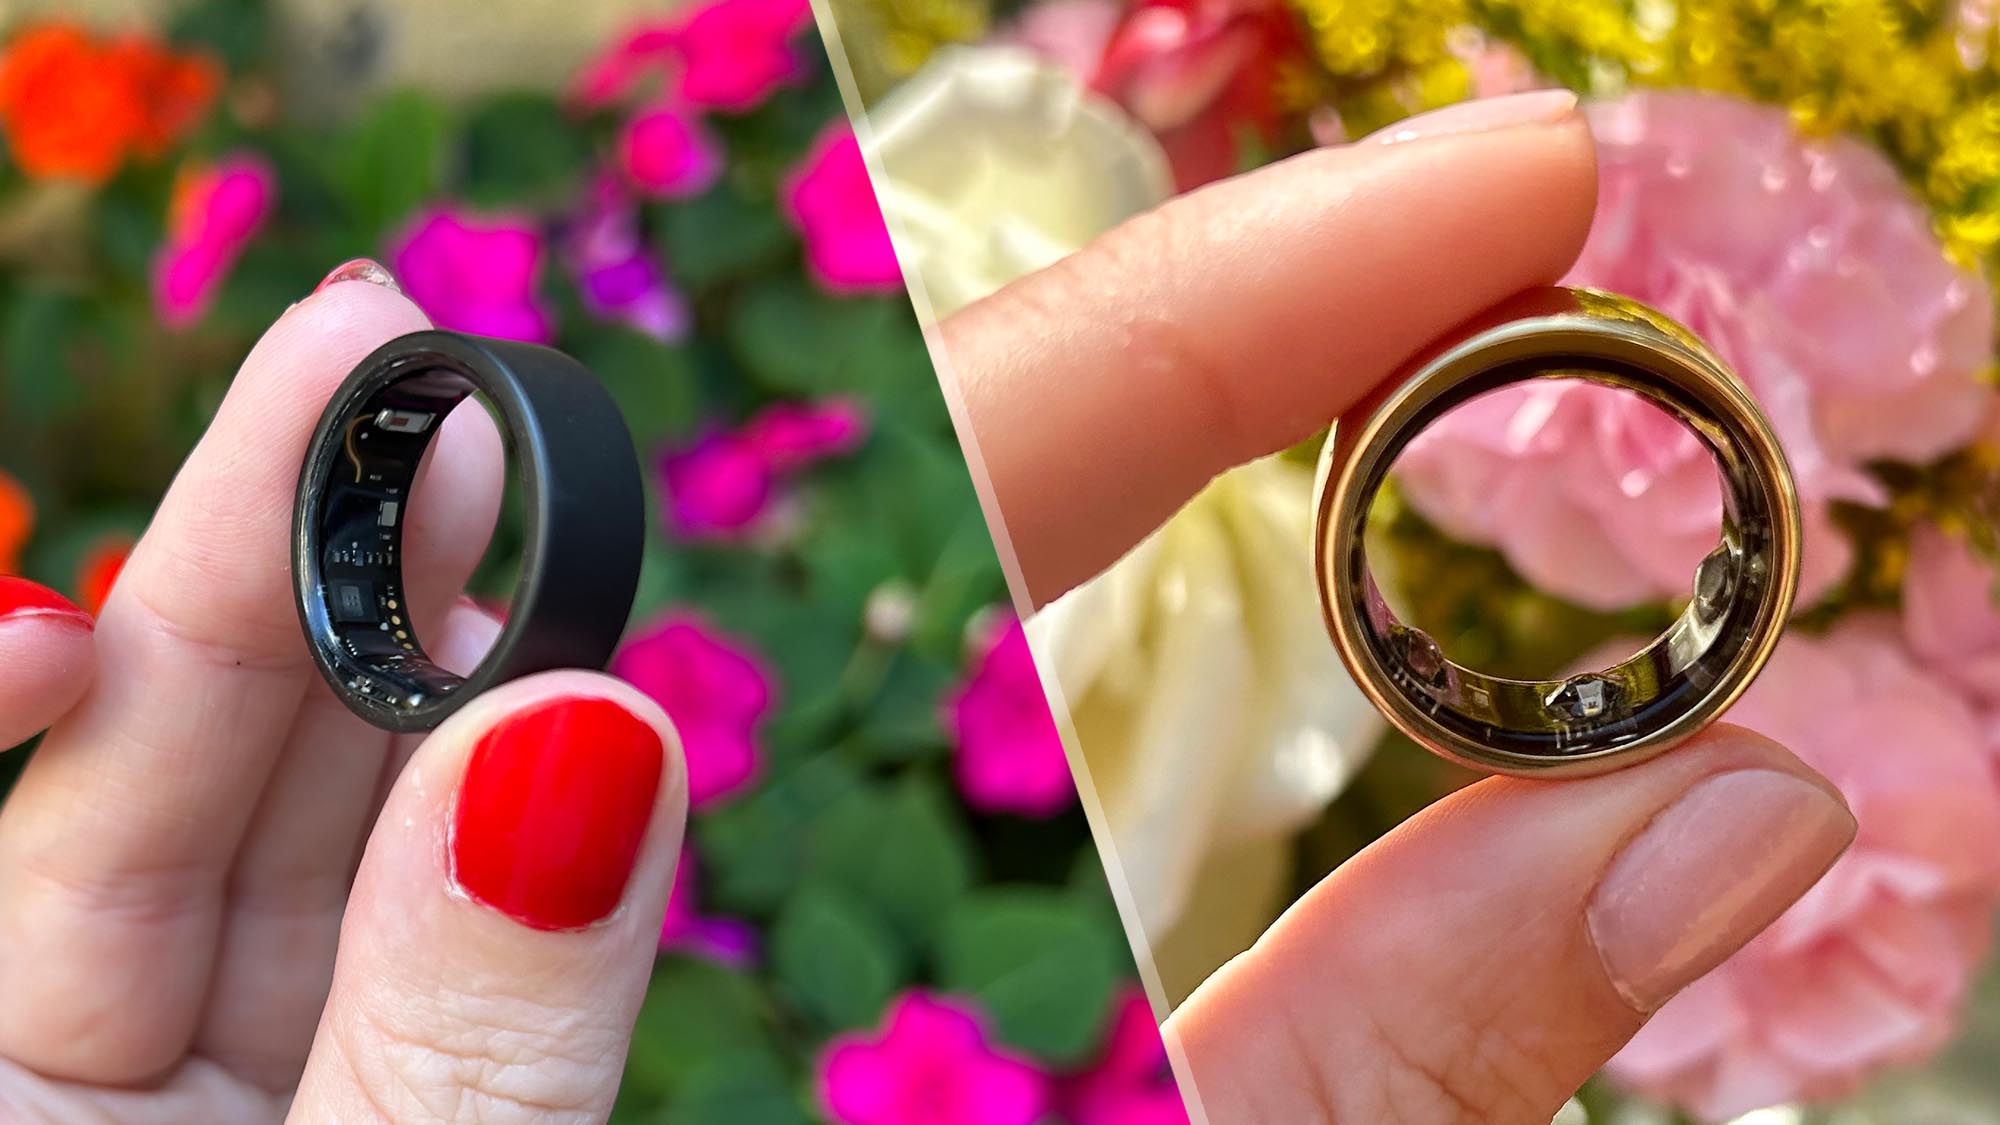 Get proactive about your health with these smart rings | by Saimahesh |  Medium